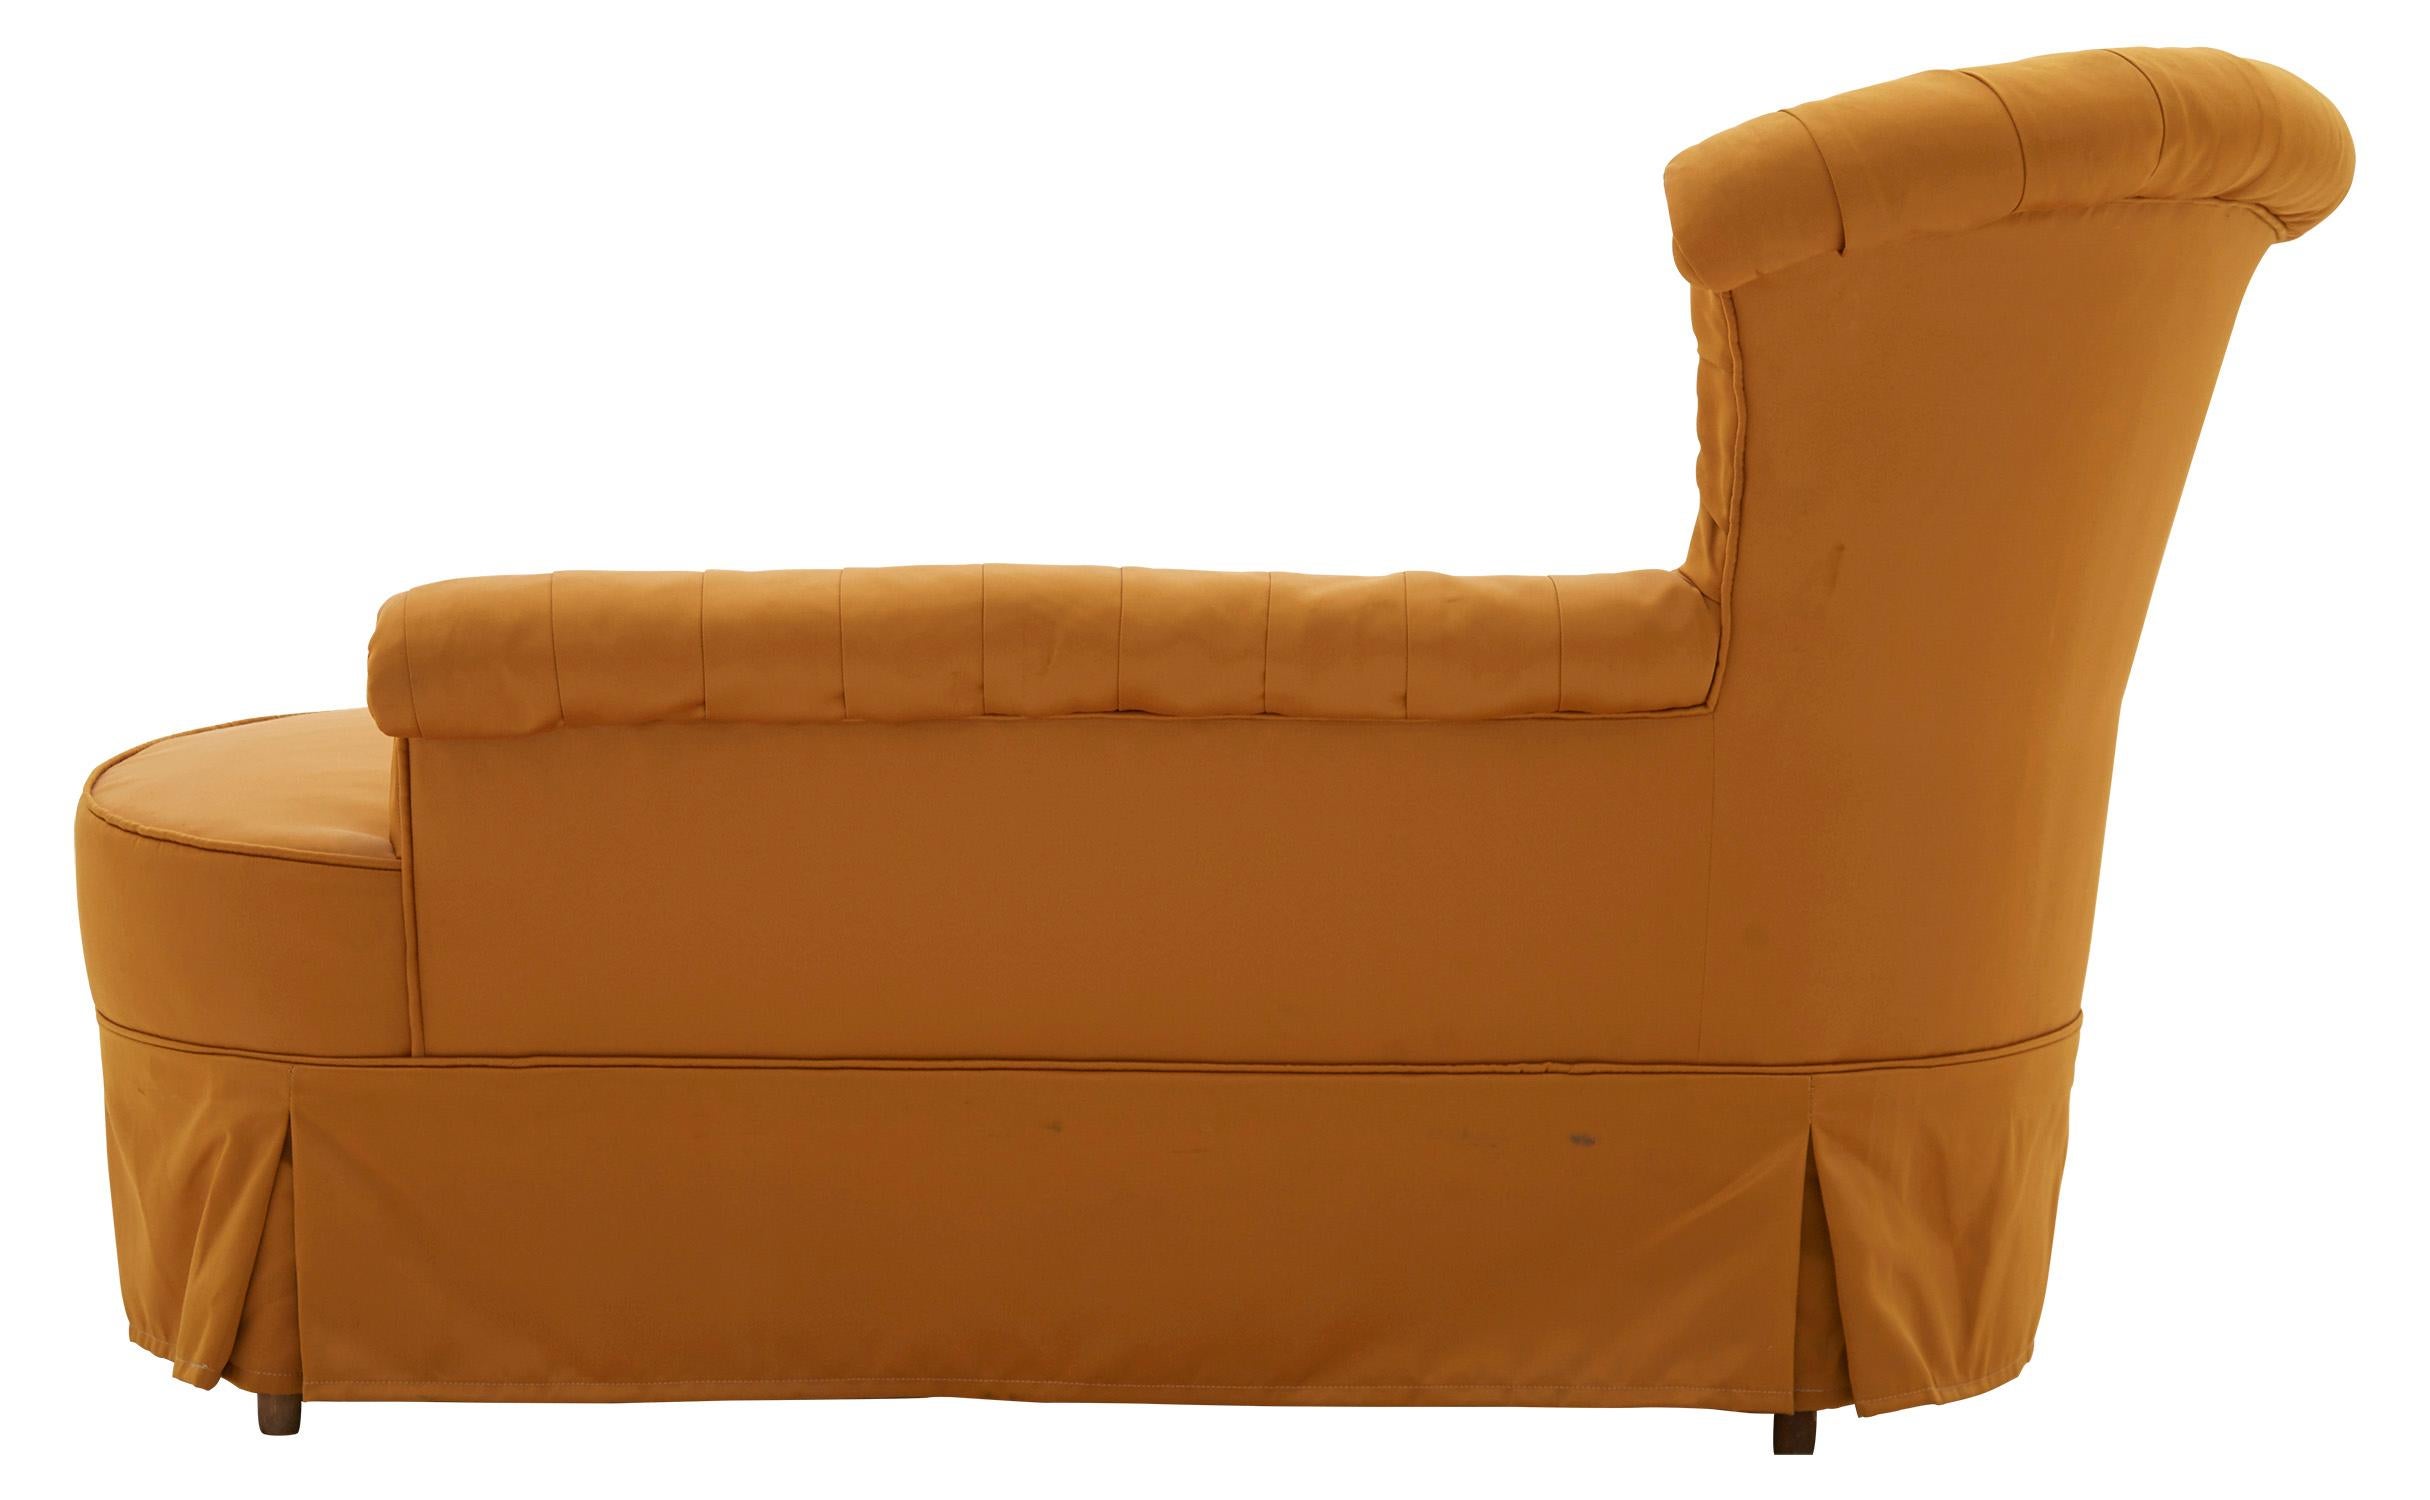 Spanish Tufted Yellow Chaise Lounge